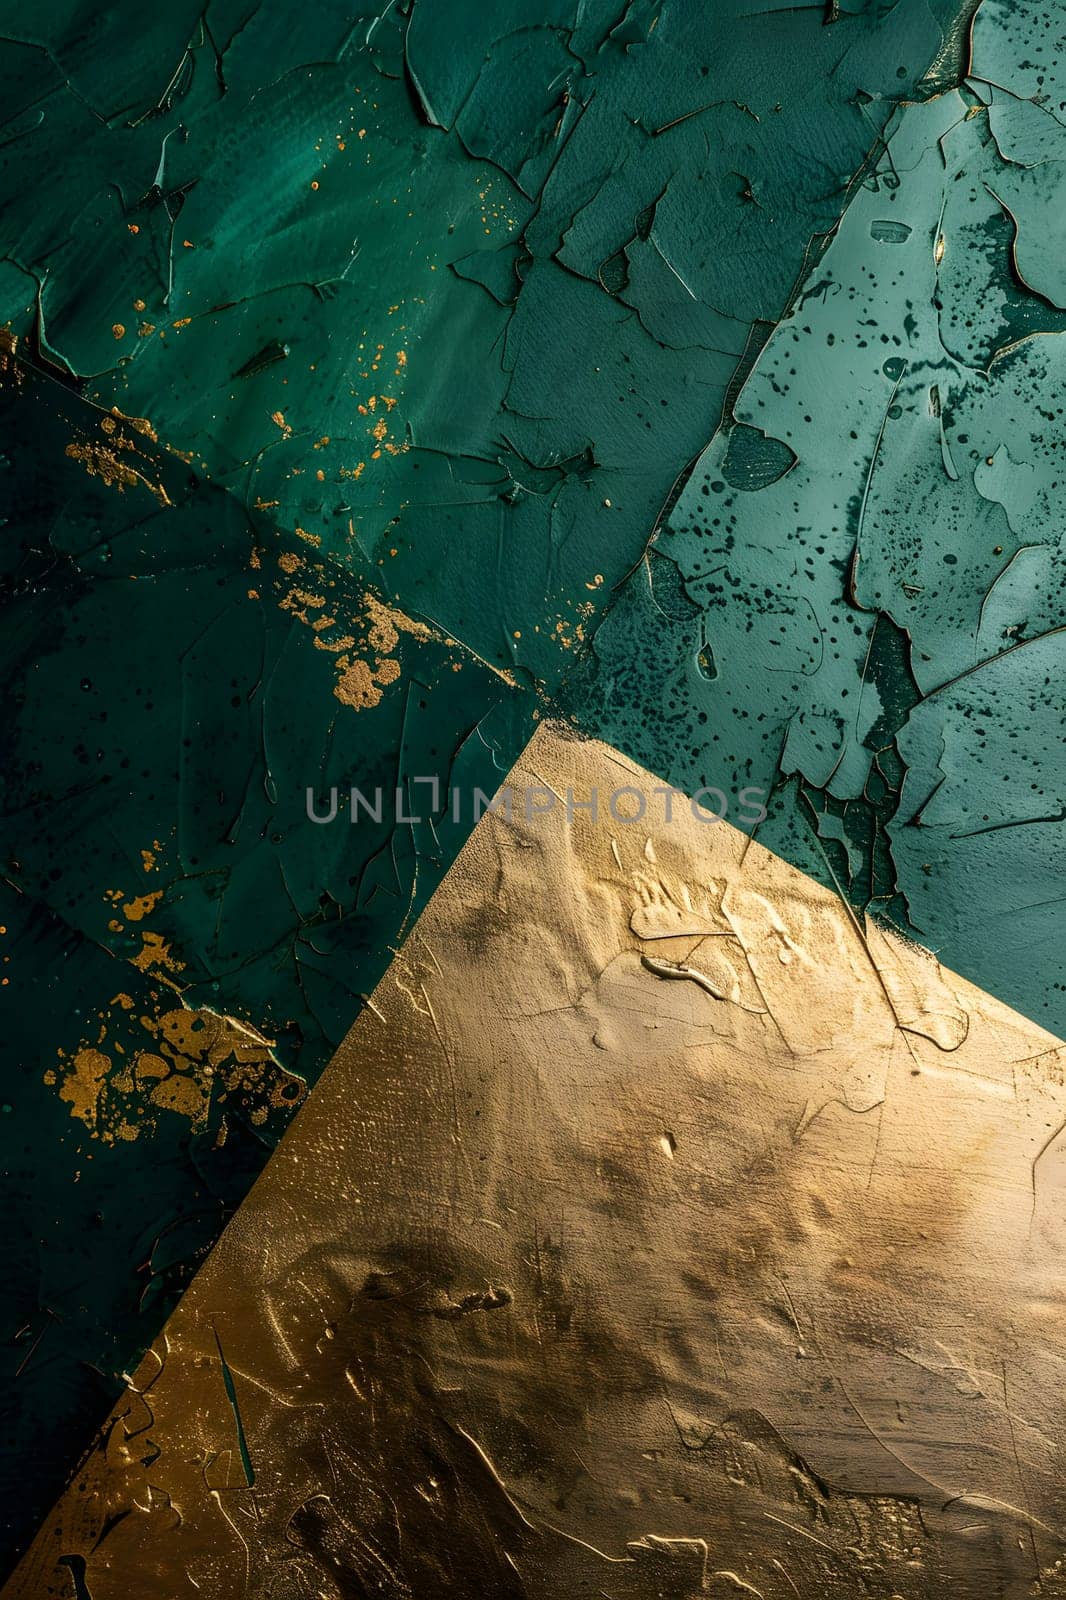 Detailed closeup of green and gold marble texture by Nadtochiy